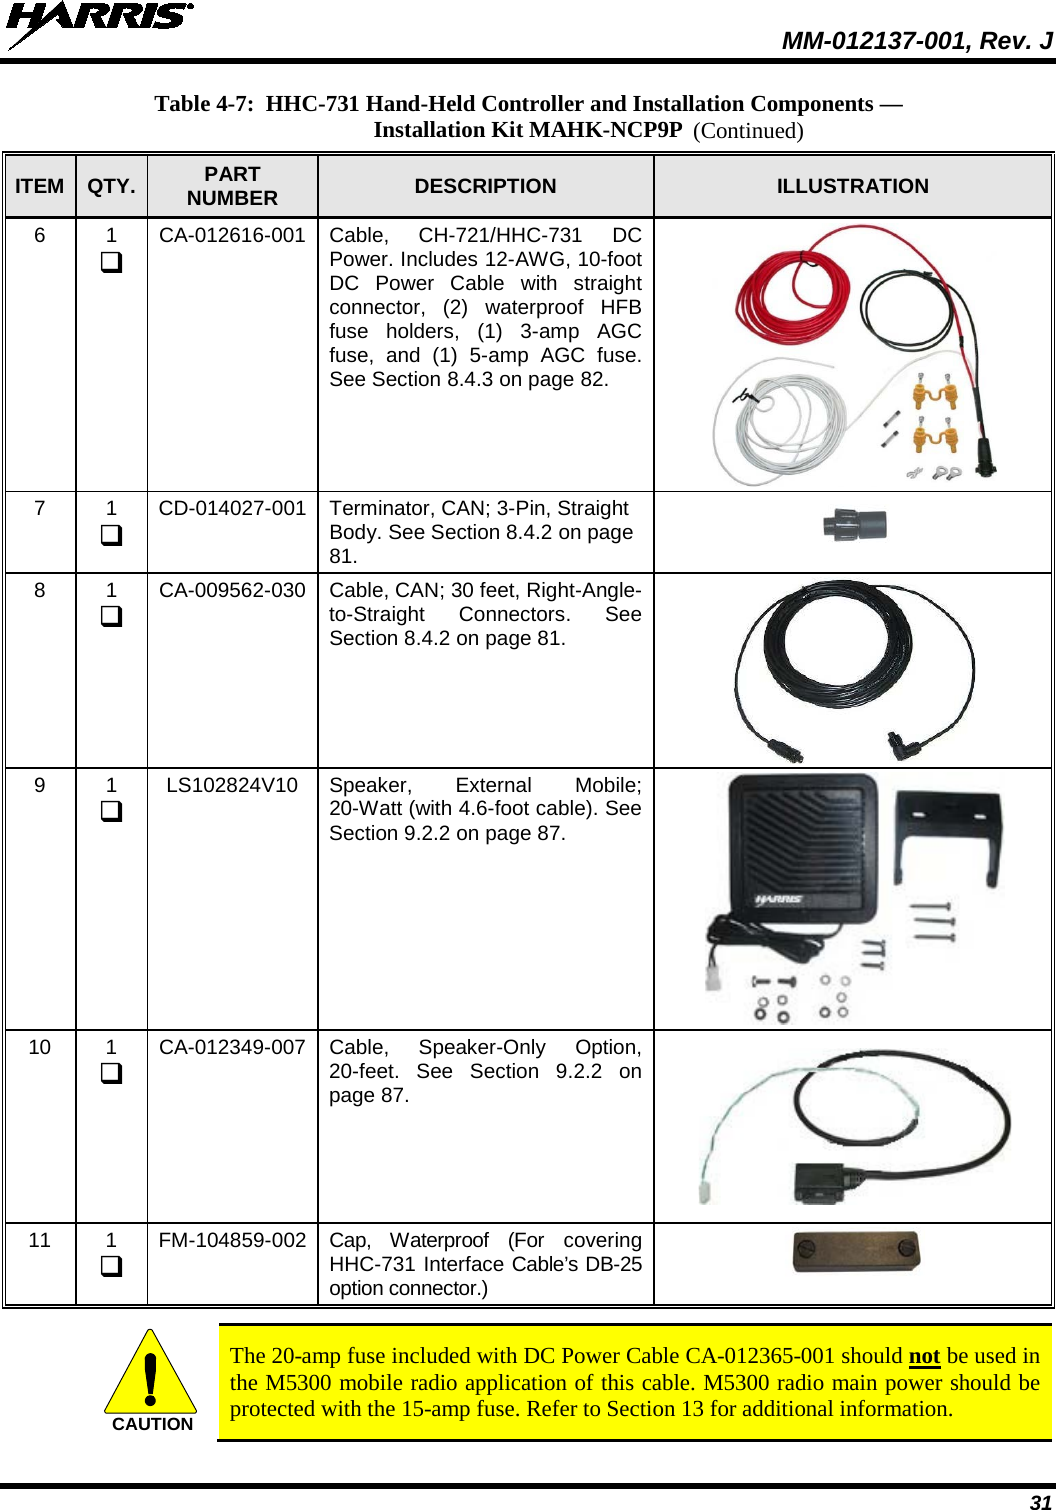  MM-012137-001, Rev. J 31 Table 4-7:  HHC-731 Hand-Held Controller and Installation Components —  Installation Kit MAHK-NCP9P ITEM QTY. PART NUMBER DESCRIPTION ILLUSTRATION 6  1  CA-012616-001 Cable, CH-721/HHC-731 DC Power. Includes 12-AWG, 10-foot DC Power Cable with straight connector, (2) waterproof HFB fuse holders, (1) 3-amp AGC fuse, and (1) 5-amp AGC fuse. See Section 8.4.3 on page 82.  7  1  CD-014027-001 Terminator, CAN; 3-Pin, Straight Body. See Section 8.4.2 on page 81.      8  1  CA-009562-030 Cable, CAN; 30 feet, Right-Angle-to-Straight Connectors. See Section 8.4.2 on page 81.  9  1  LS102824V10 Speaker, External Mobile; 20-Watt (with 4.6-foot cable). See Section 9.2.2 on page 87.  10  1  CA-012349-007 Cable,  Speaker-Only Option, 20-feet.  See Section 9.2.2 on page 87.  11  1  FM-104859-002 Cap,  Waterproof (For covering HHC-731 Interface Cable’s DB-25 option connector.)     The 20-amp fuse included with DC Power Cable CA-012365-001 should not be used in the M5300 mobile radio application of this cable. M5300 radio main power should be protected with the 15-amp fuse. Refer to Section 13 for additional information.  CAUTION(Continued) 